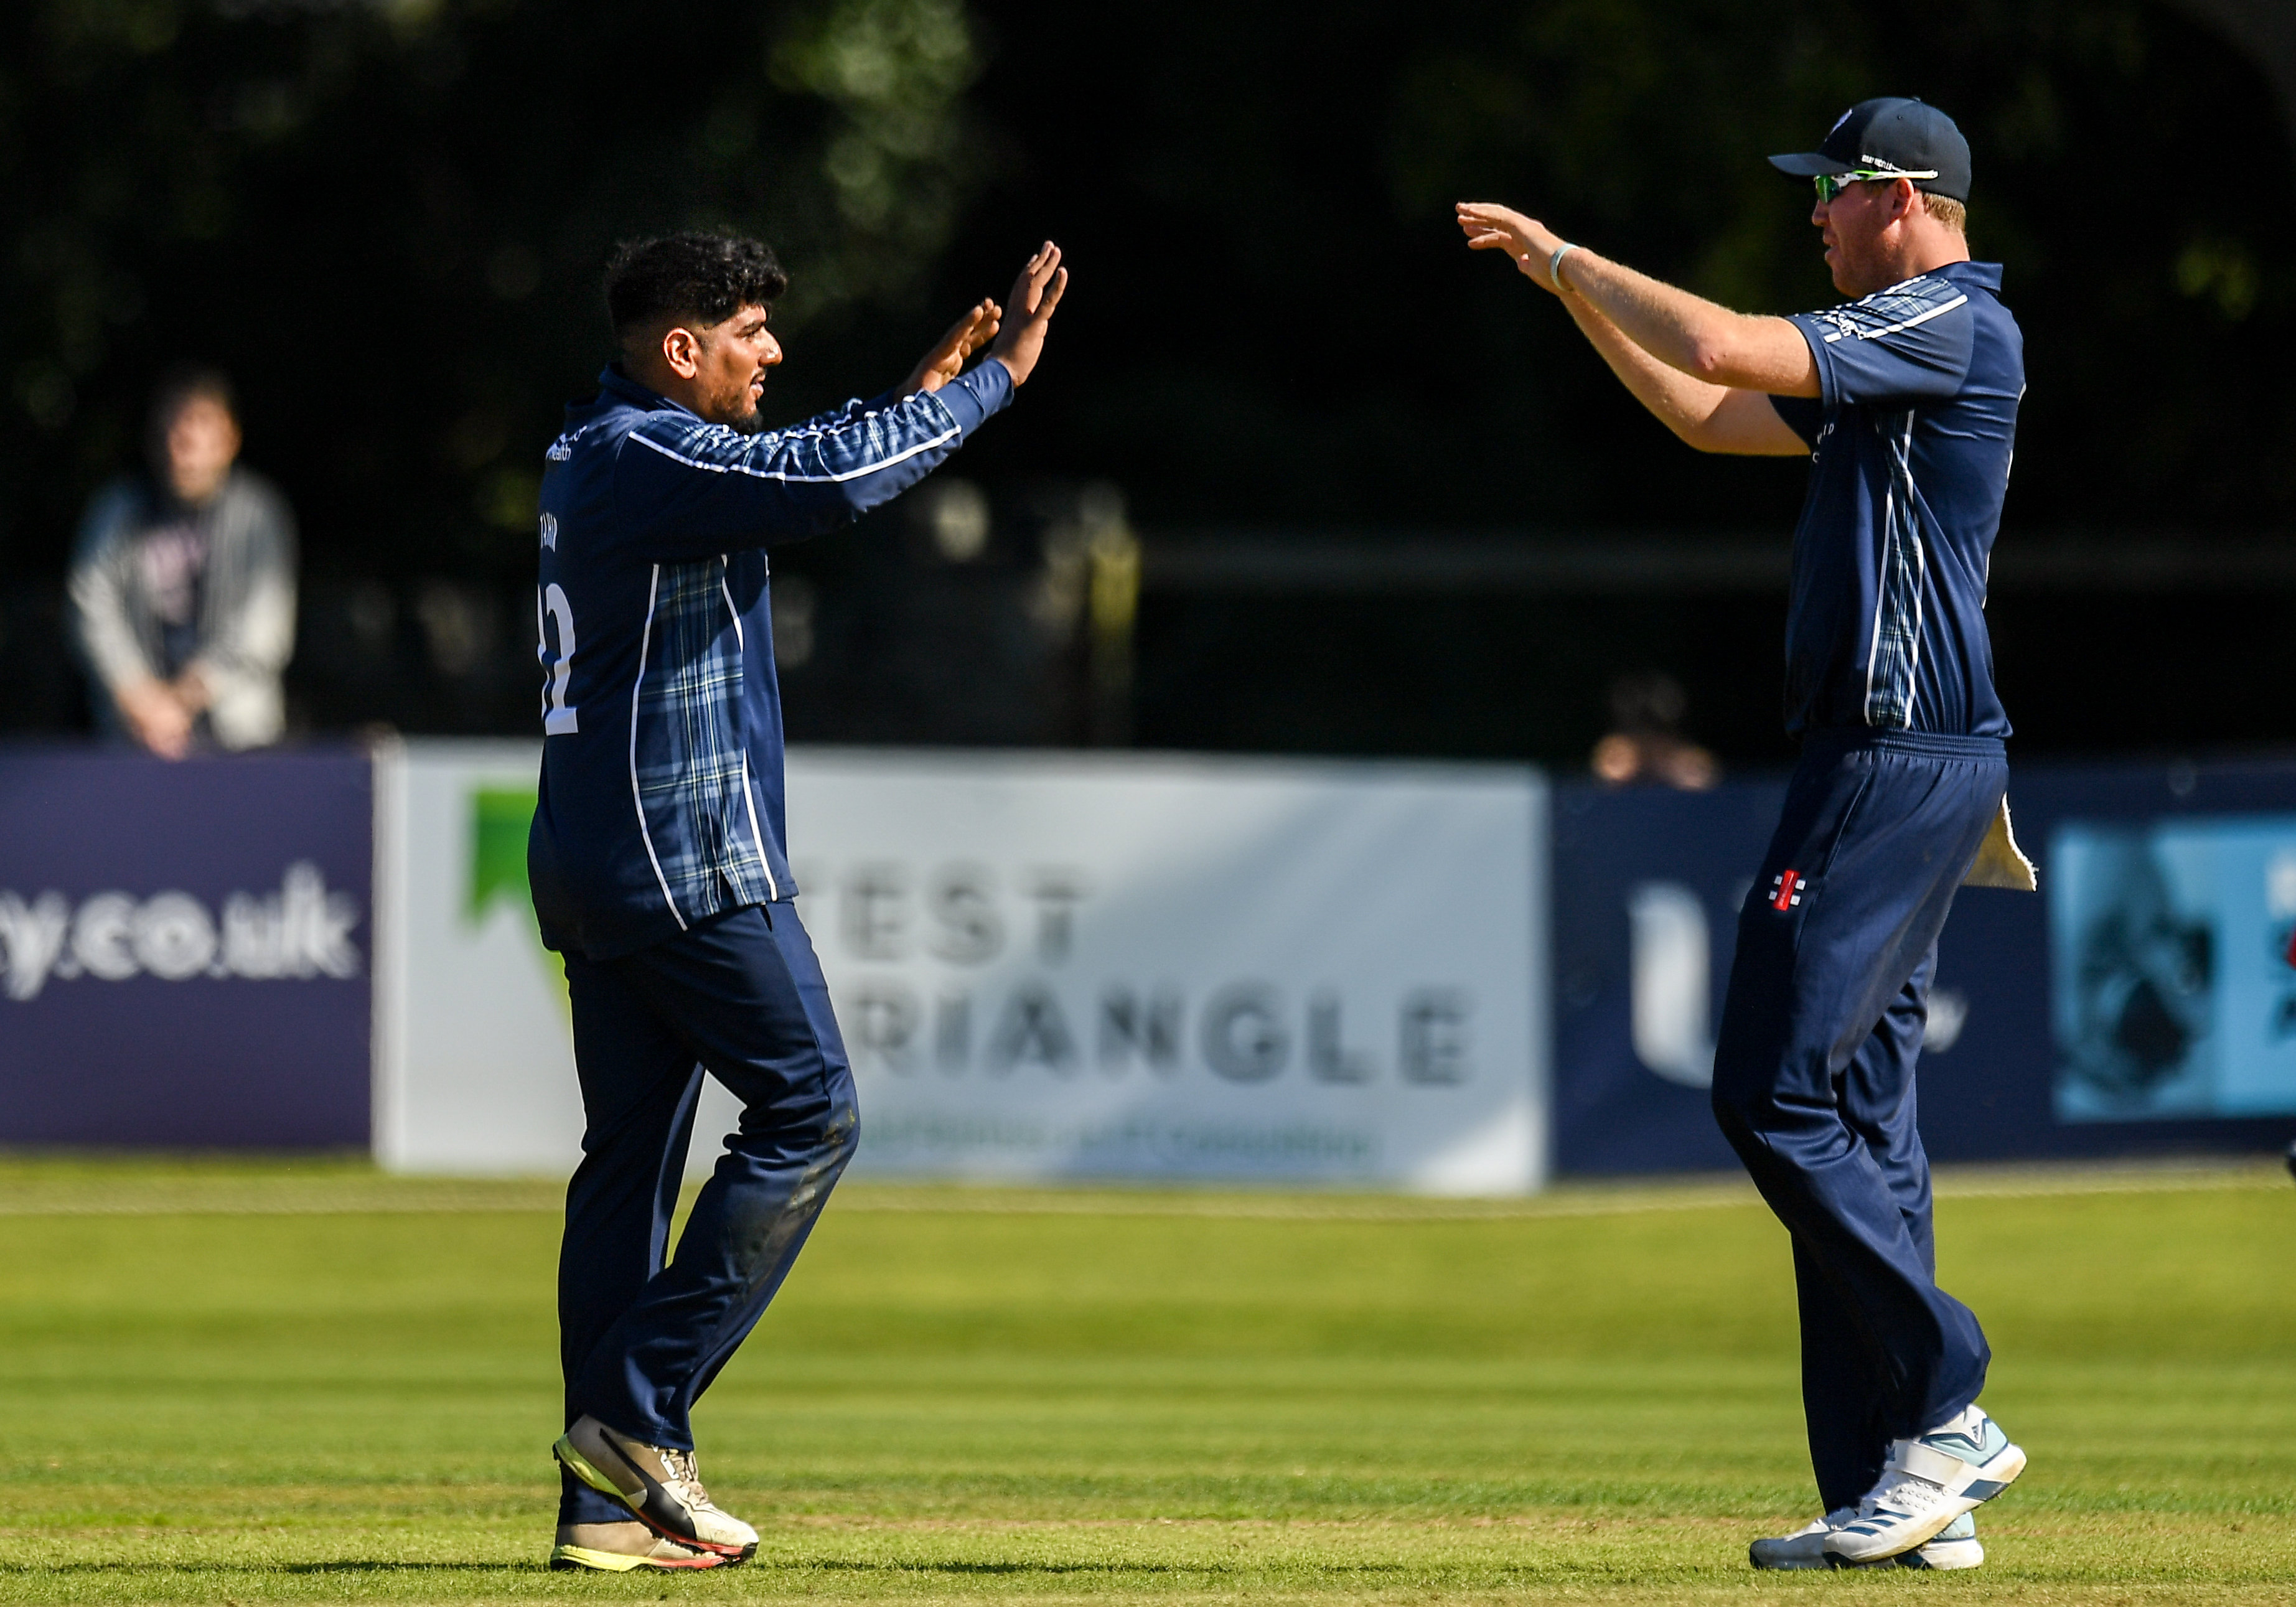 Scotland back on top in GS Holding T20I Tri-Series